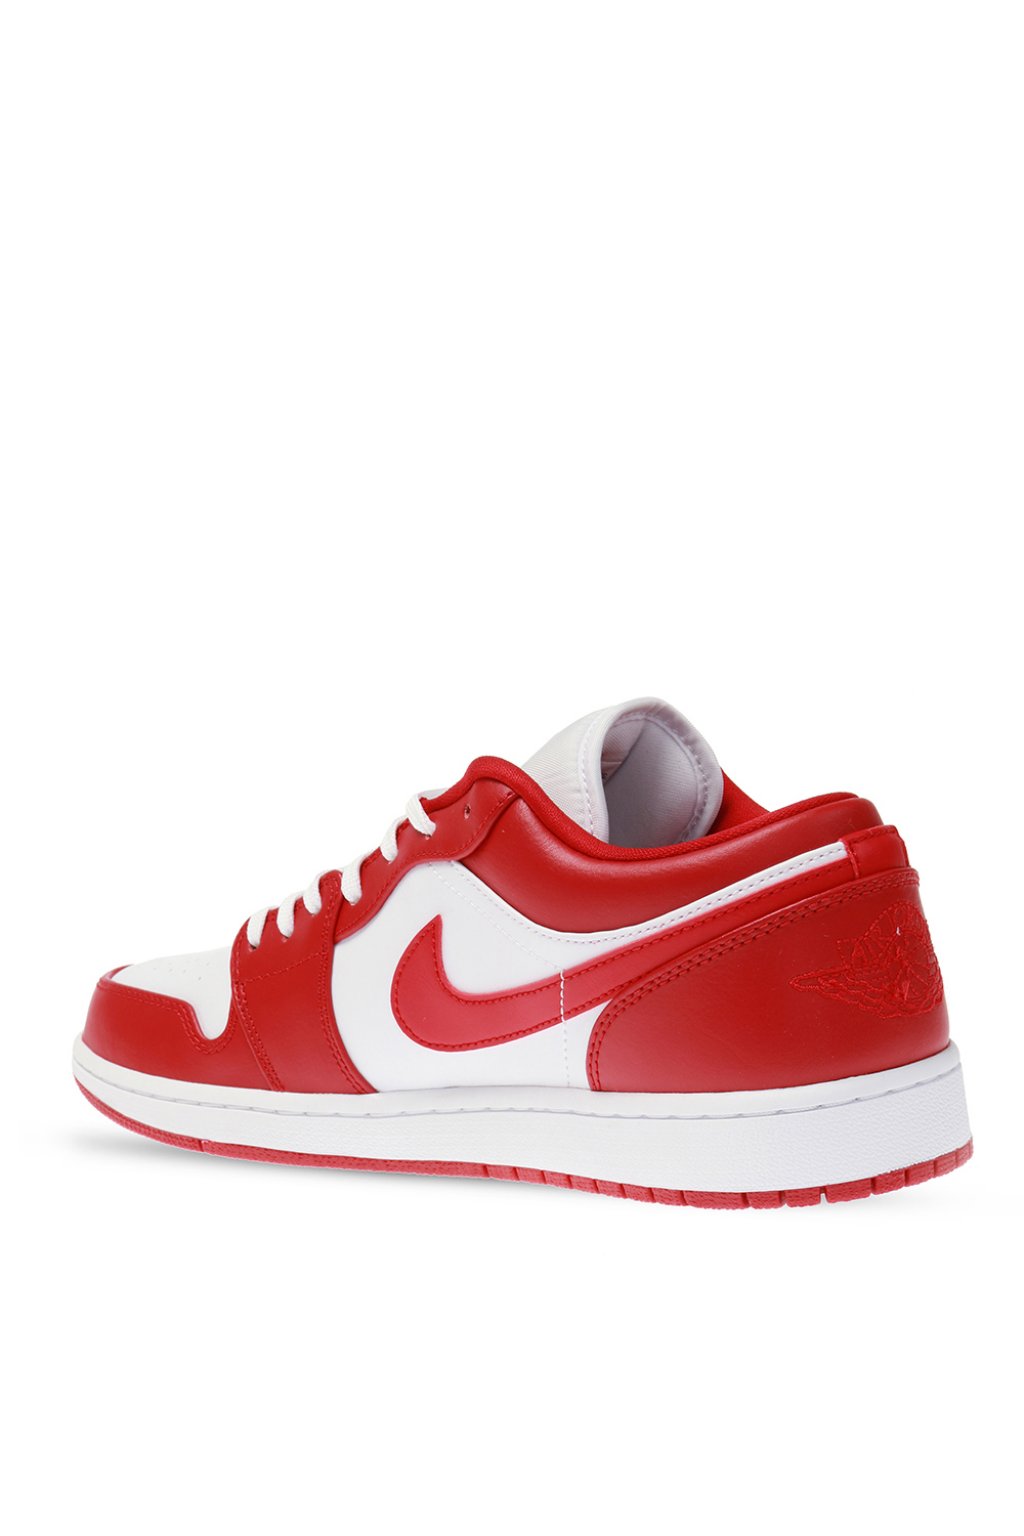 red and white jordan 1 low top